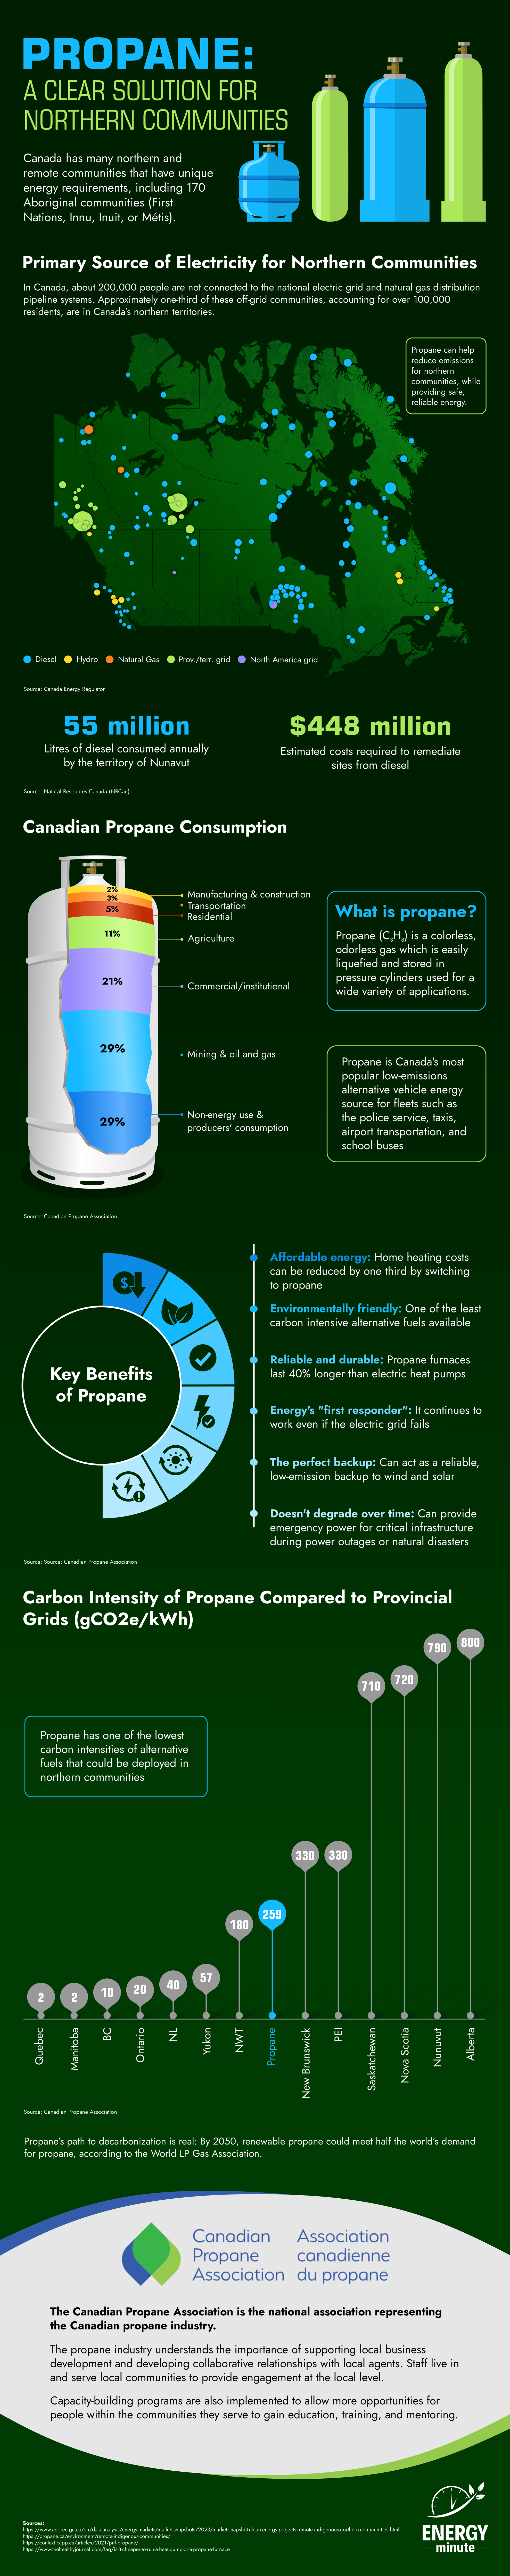 Propane as a fuel for northern and remote communities